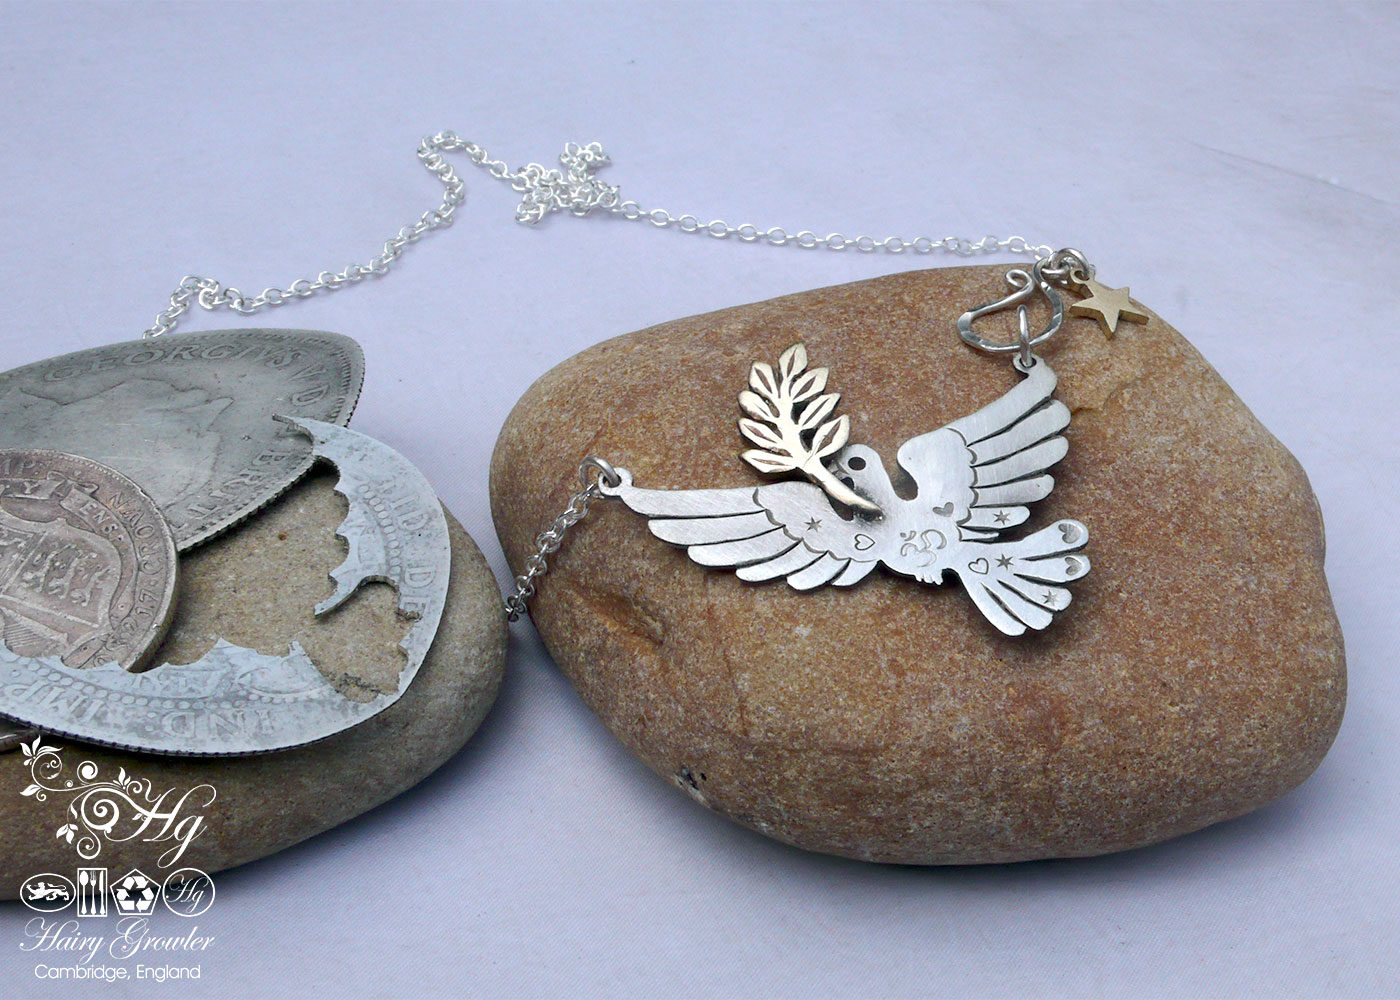 Handcrafted and recycled sterling silver beautiful peace and love doves necklace.